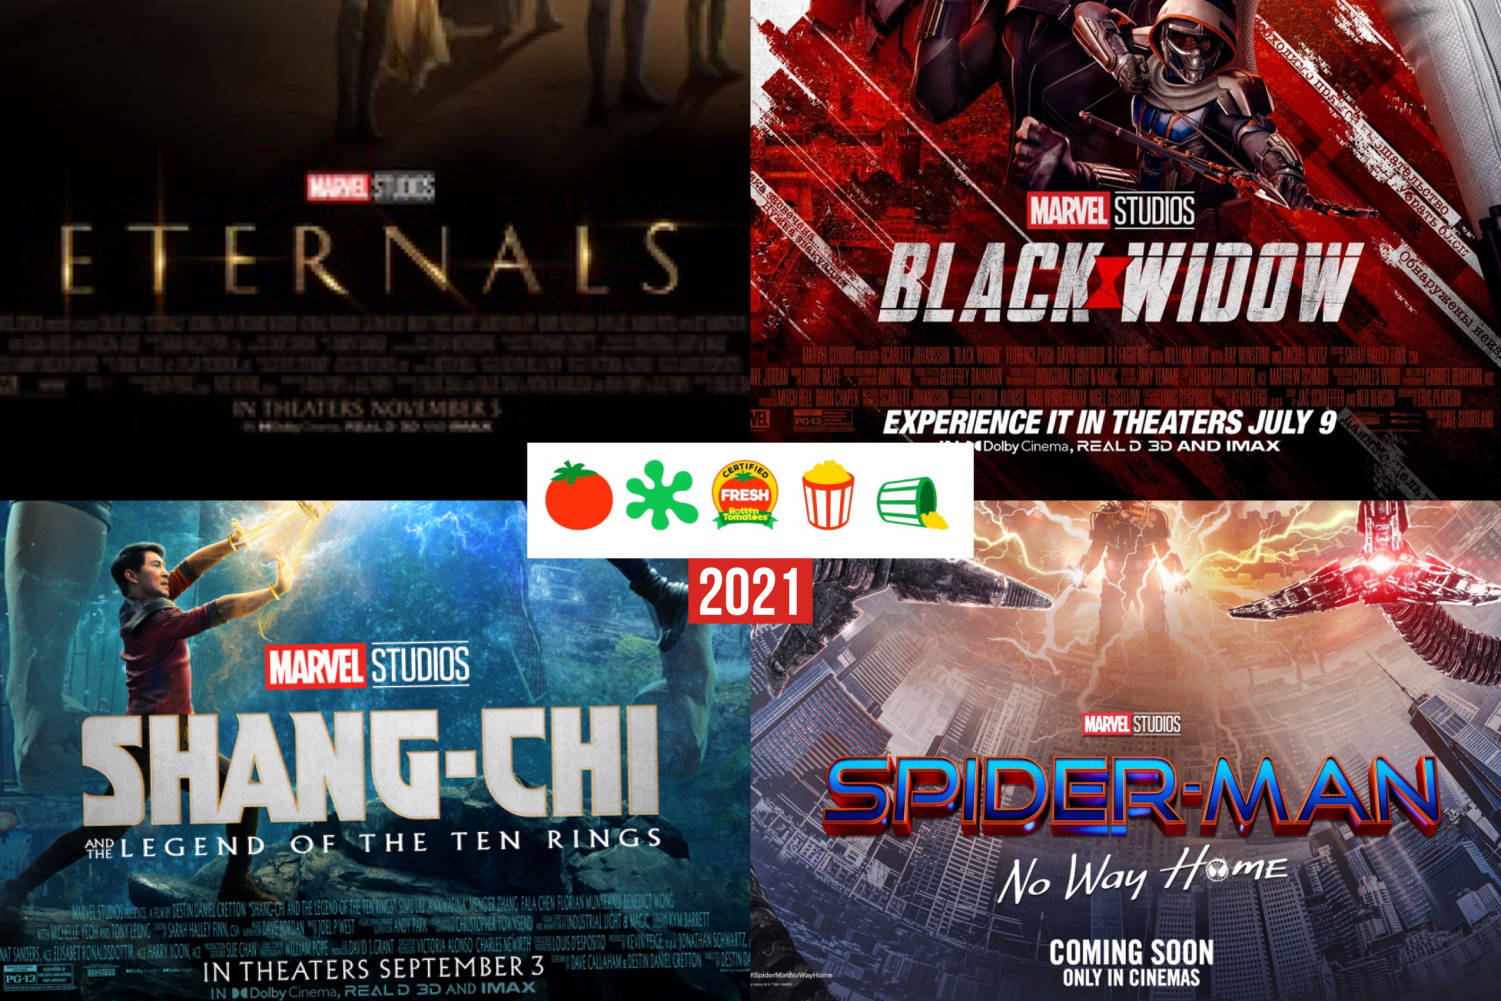 Predicting The Rotten Tomatoes Scores For Every Upcoming Marvel Movie